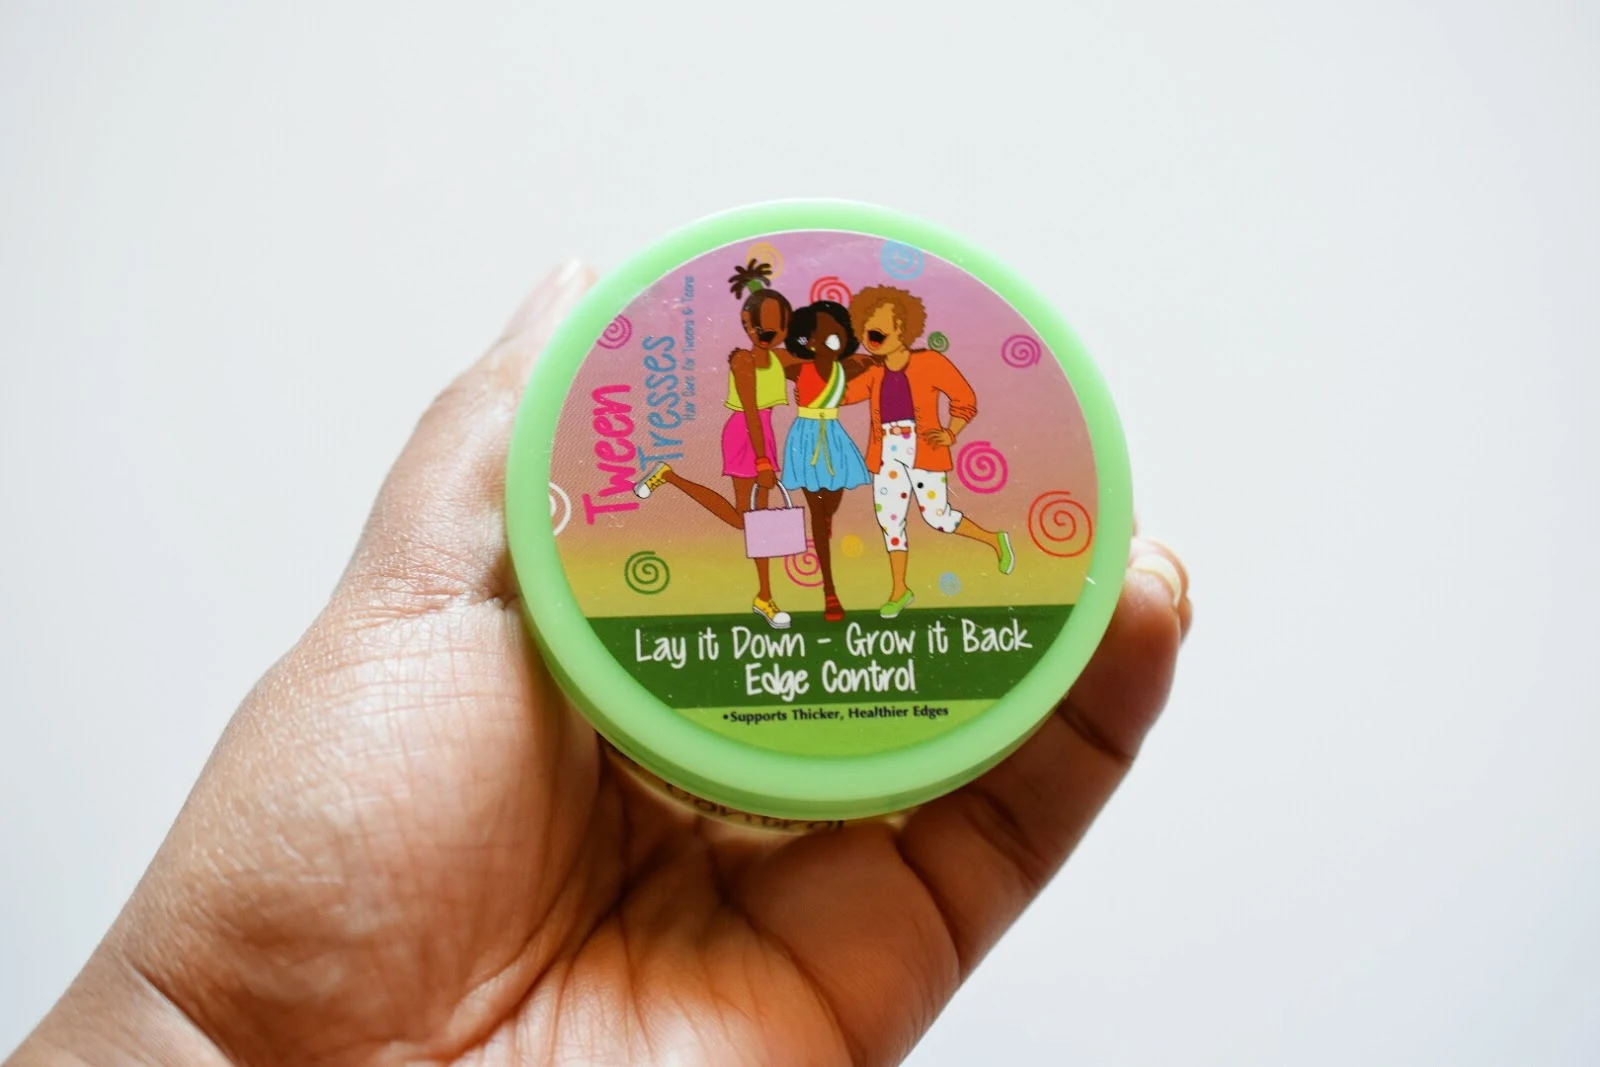 Hair Care Products for Tweens and Teens: Tween Tresses Review  via  www.productreviewmom.com